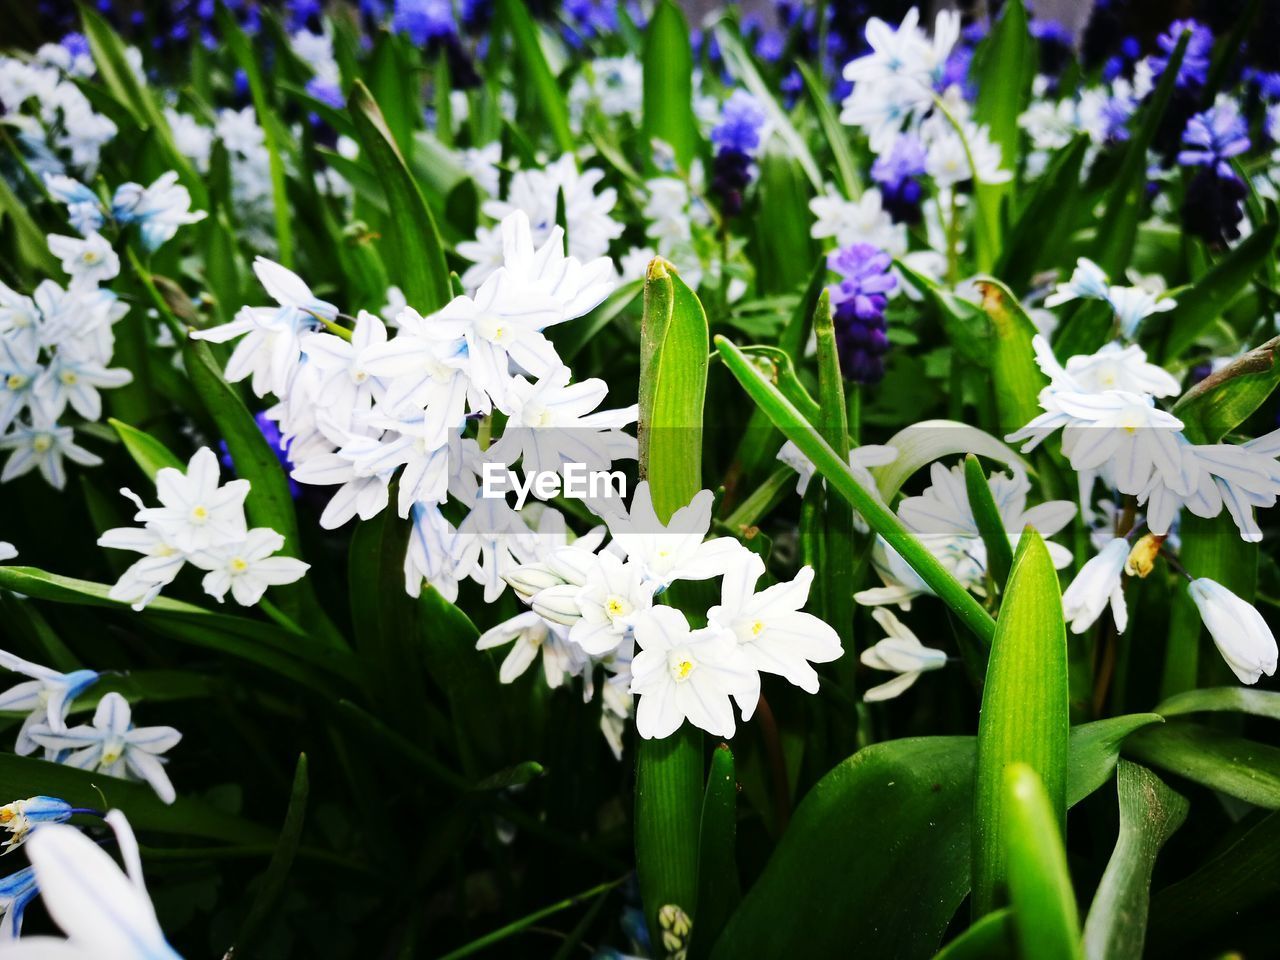 CLOSE-UP OF FRESH WHITE FLOWERS BLOOMING IN PARK